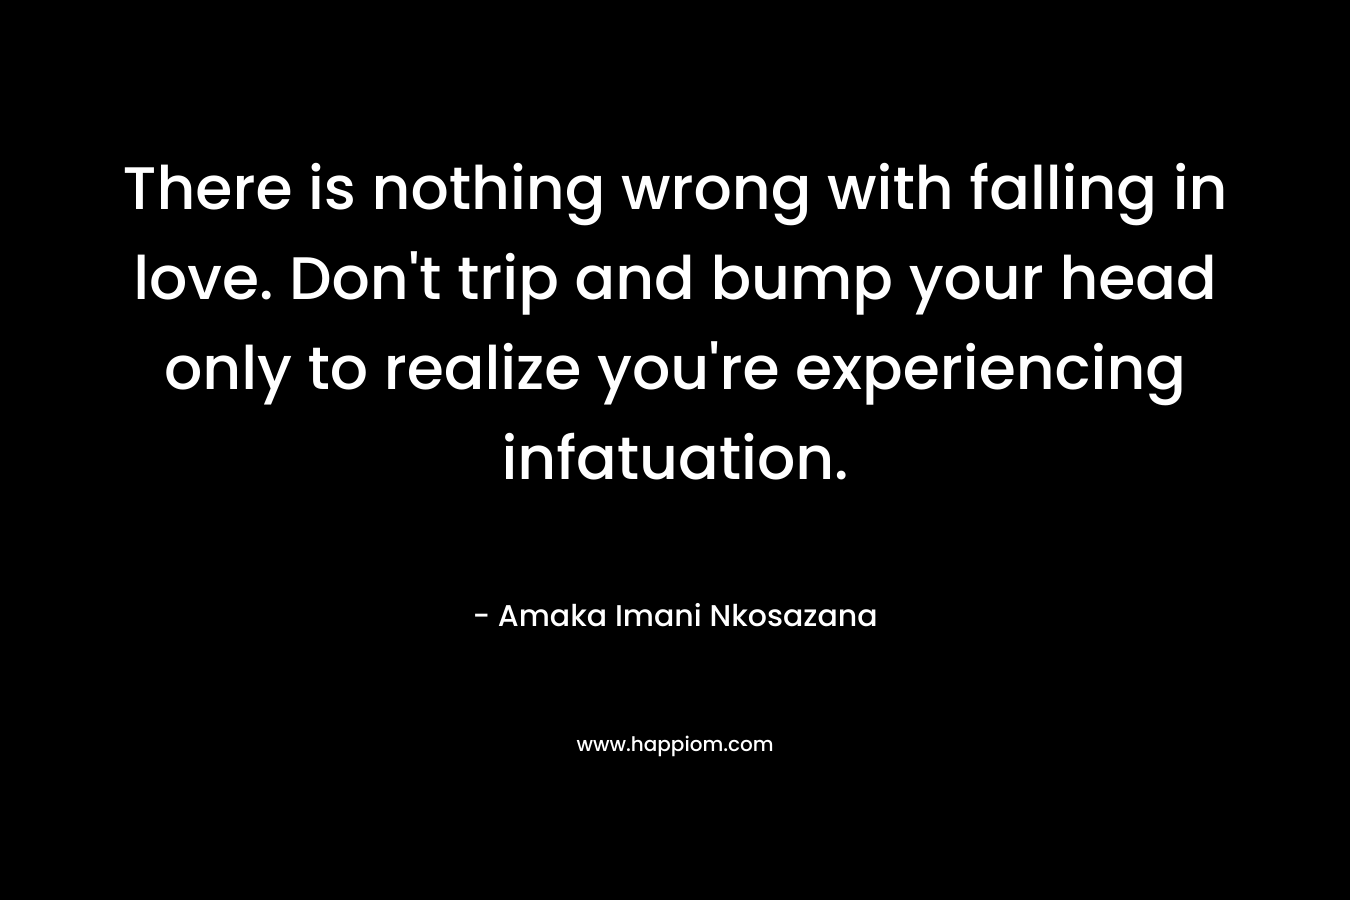 There is nothing wrong with falling in love. Don't trip and bump your head only to realize you're experiencing infatuation.